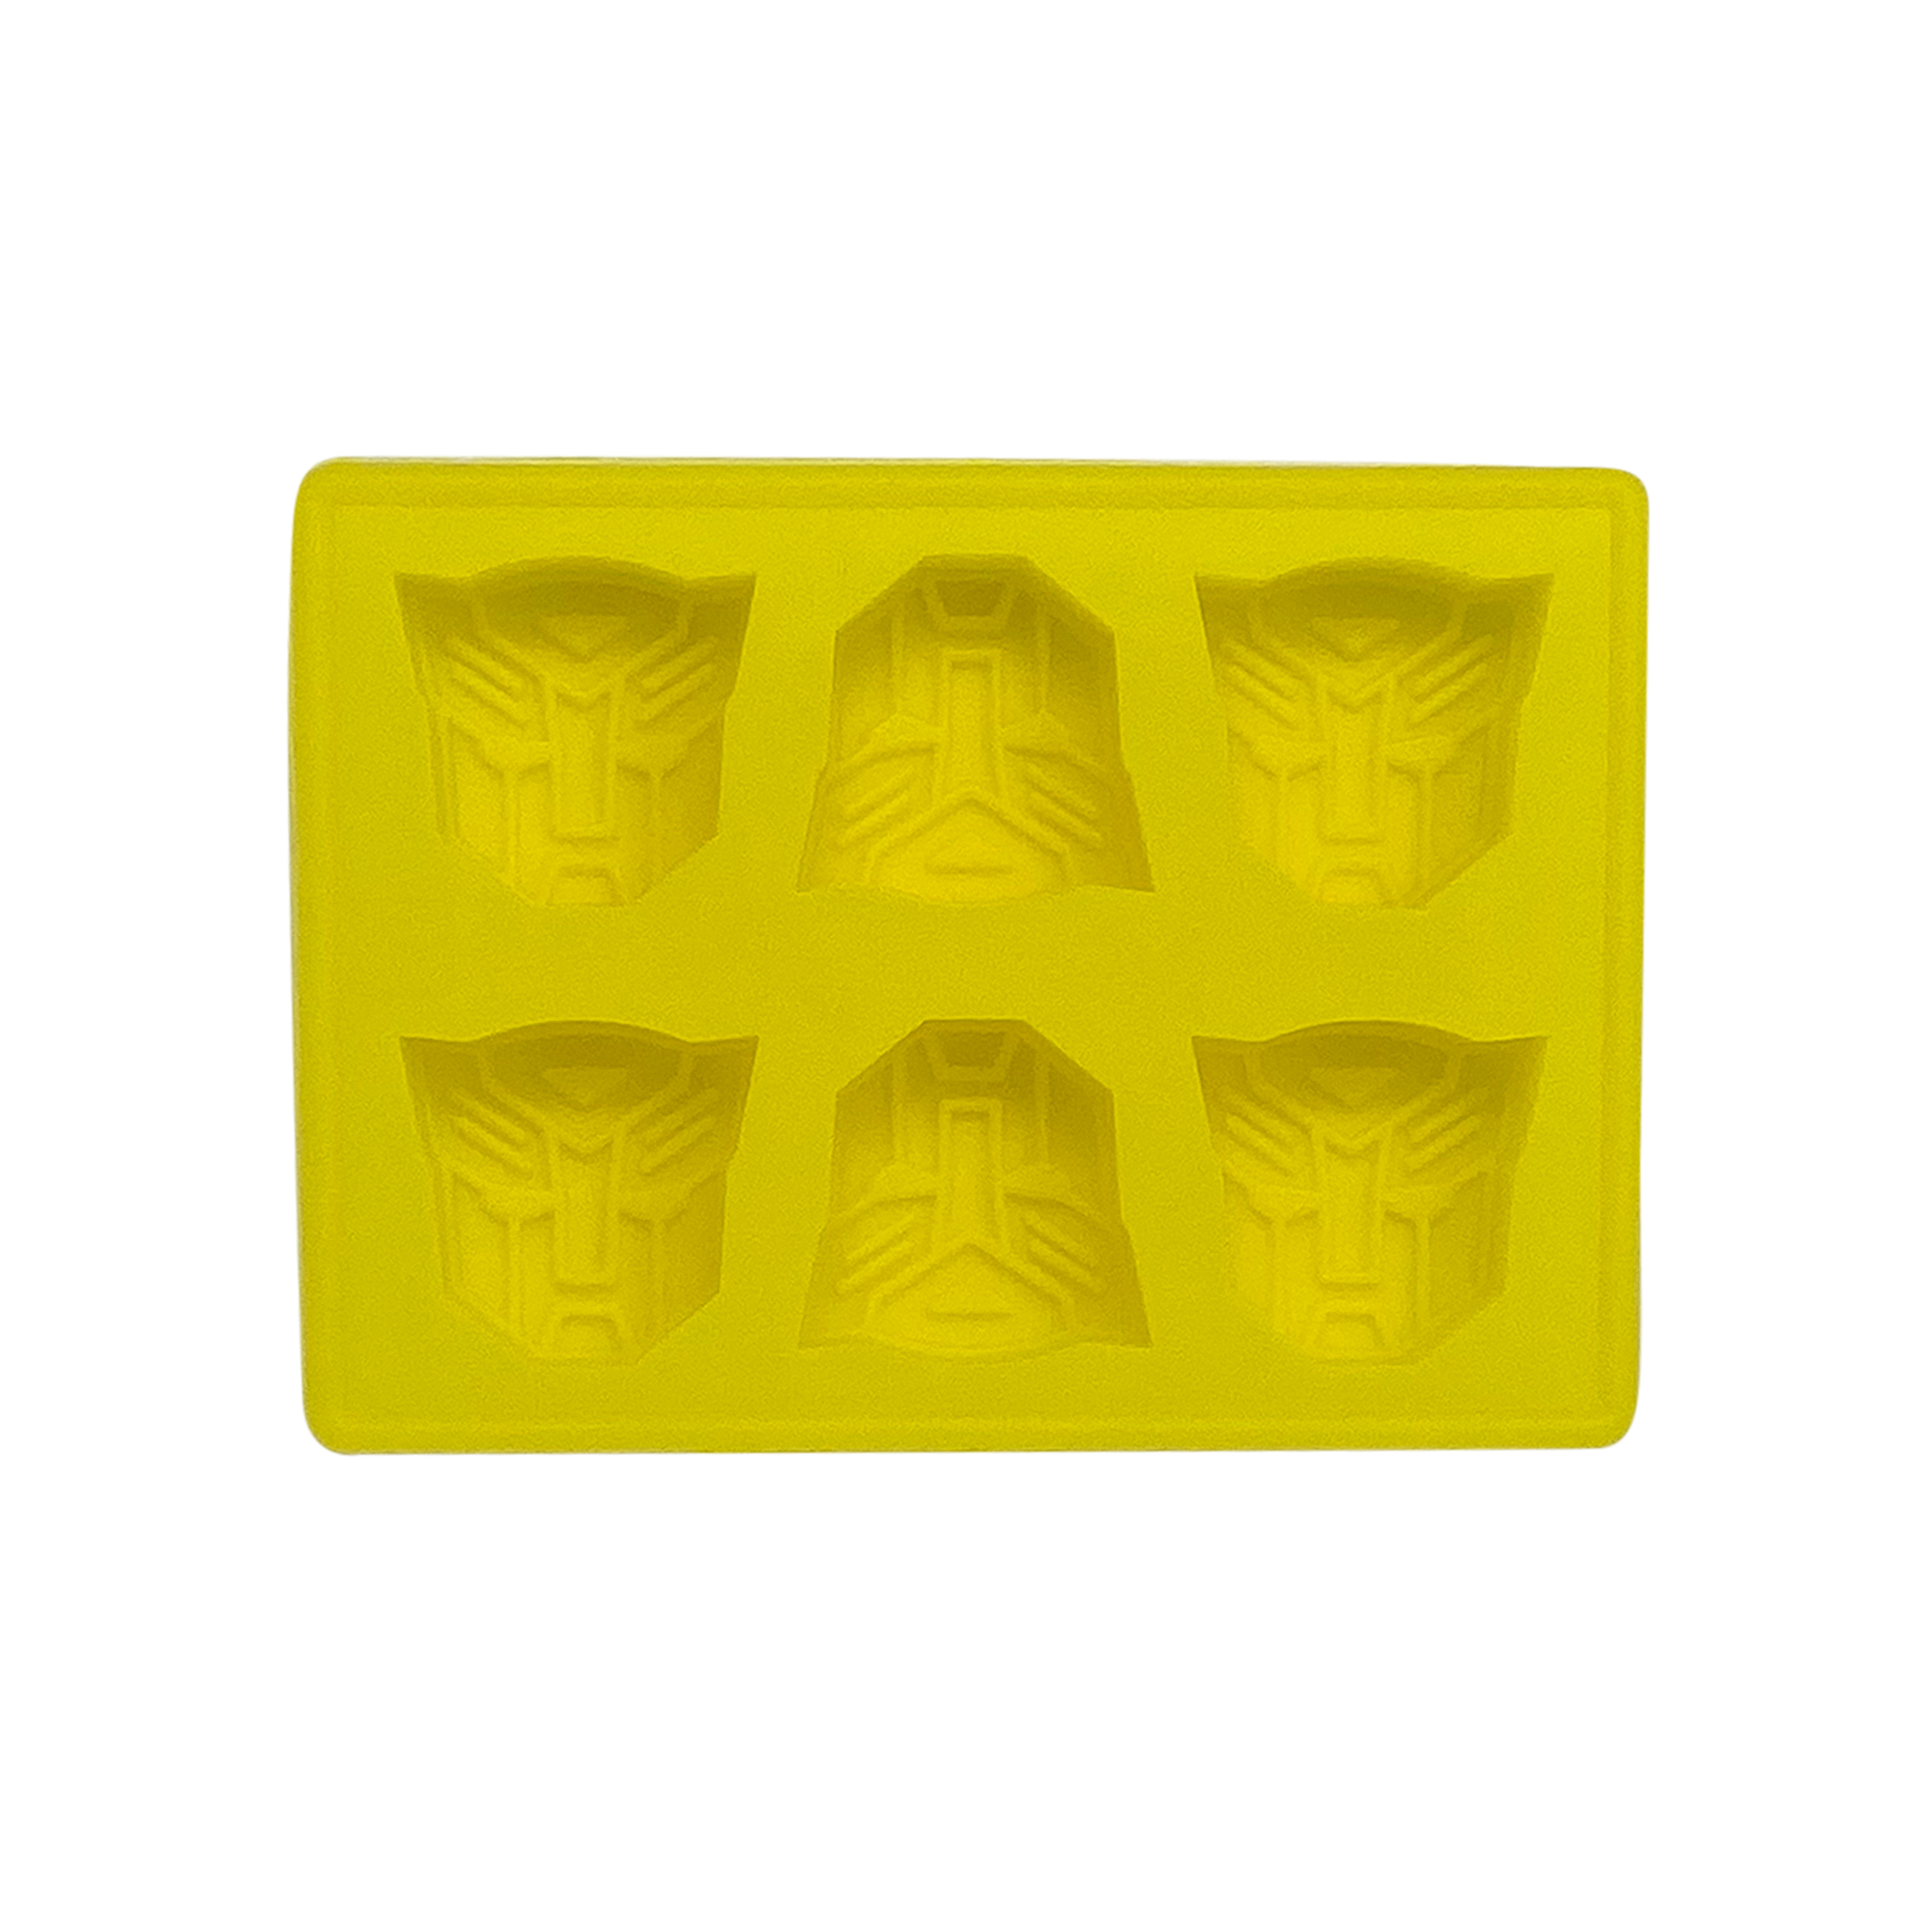 Ice Tray - Transformers Autobots - image 1 of 2